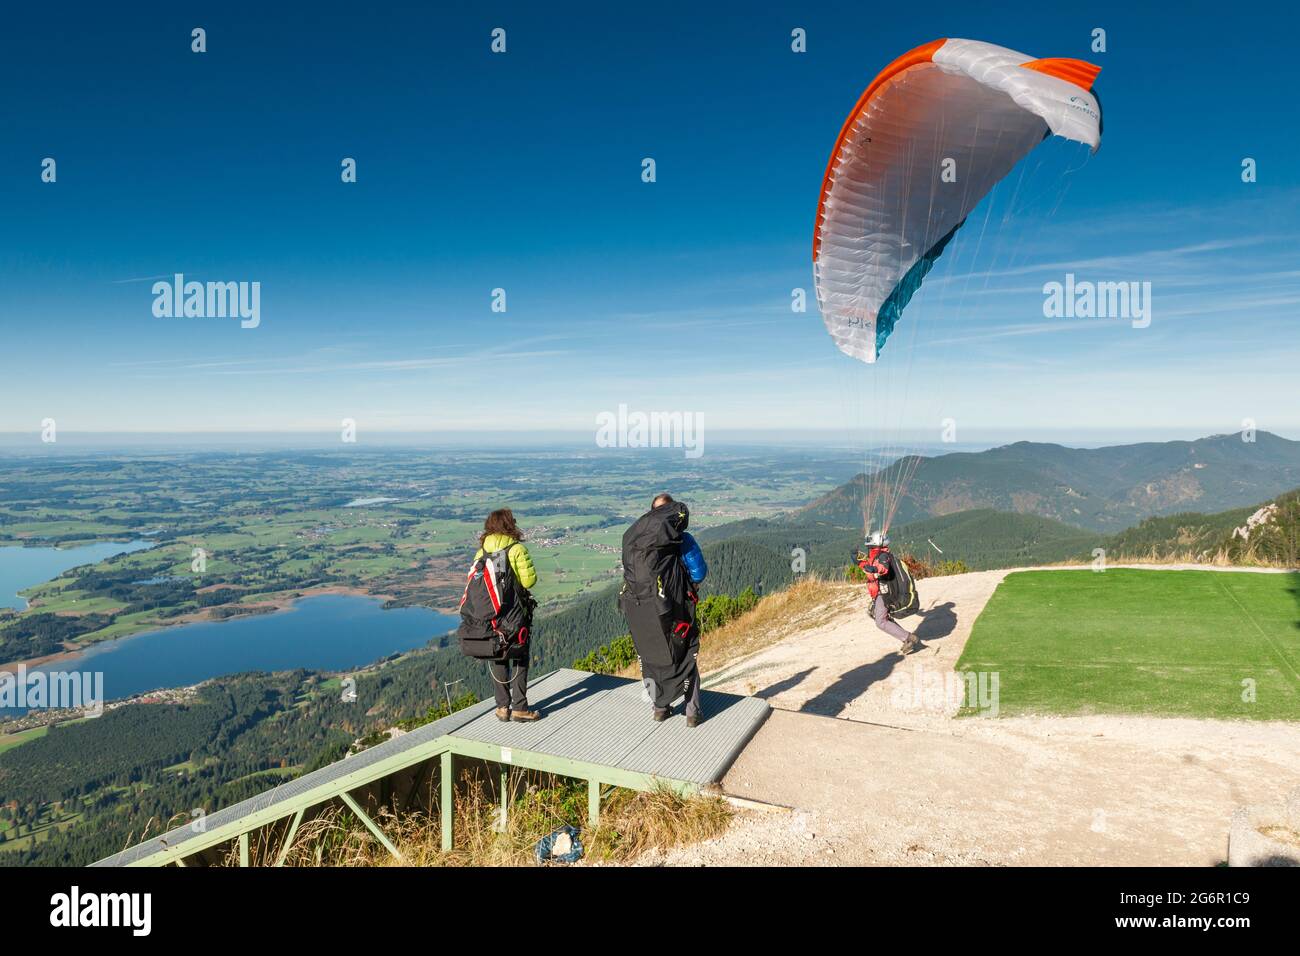 Schwangau, Germany - October 11, 2017: Paragliders starting on the Tegelberg at the jump point with other athletes standing next to them. Stock Photo